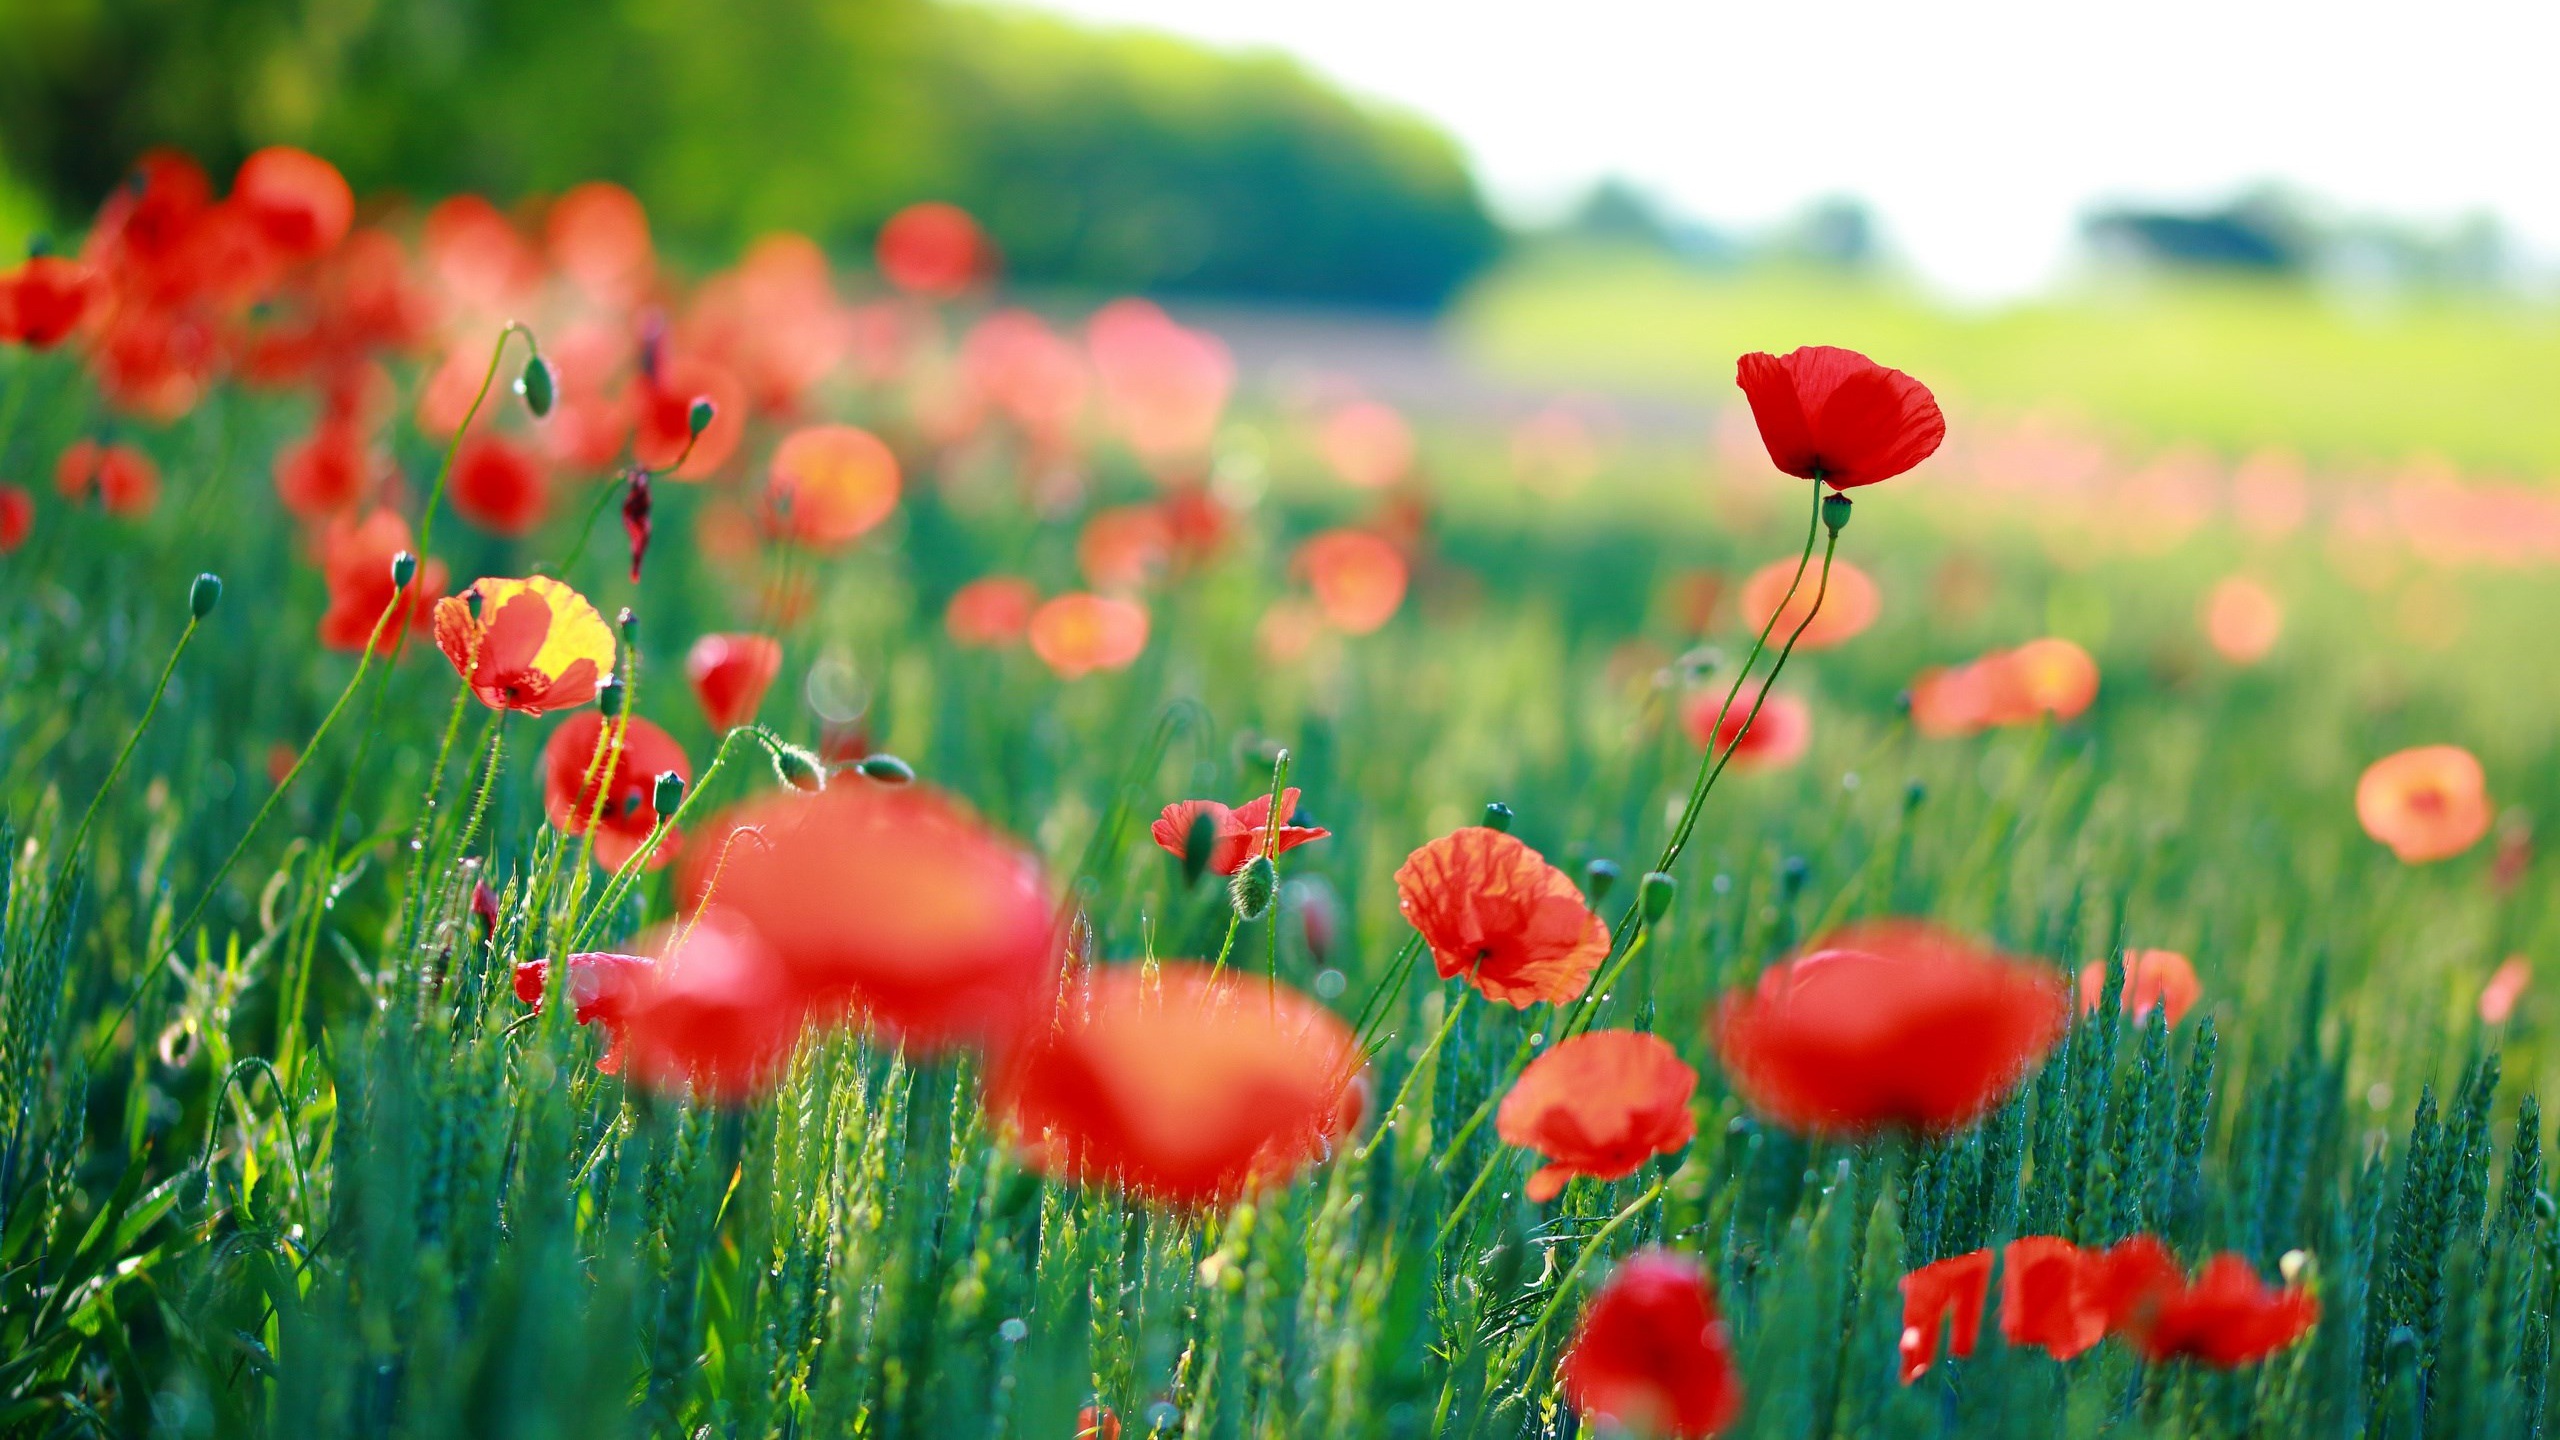 HD wallpaper A field of Red Poppies summer flowers green nature bloom   Wallpaper Flare